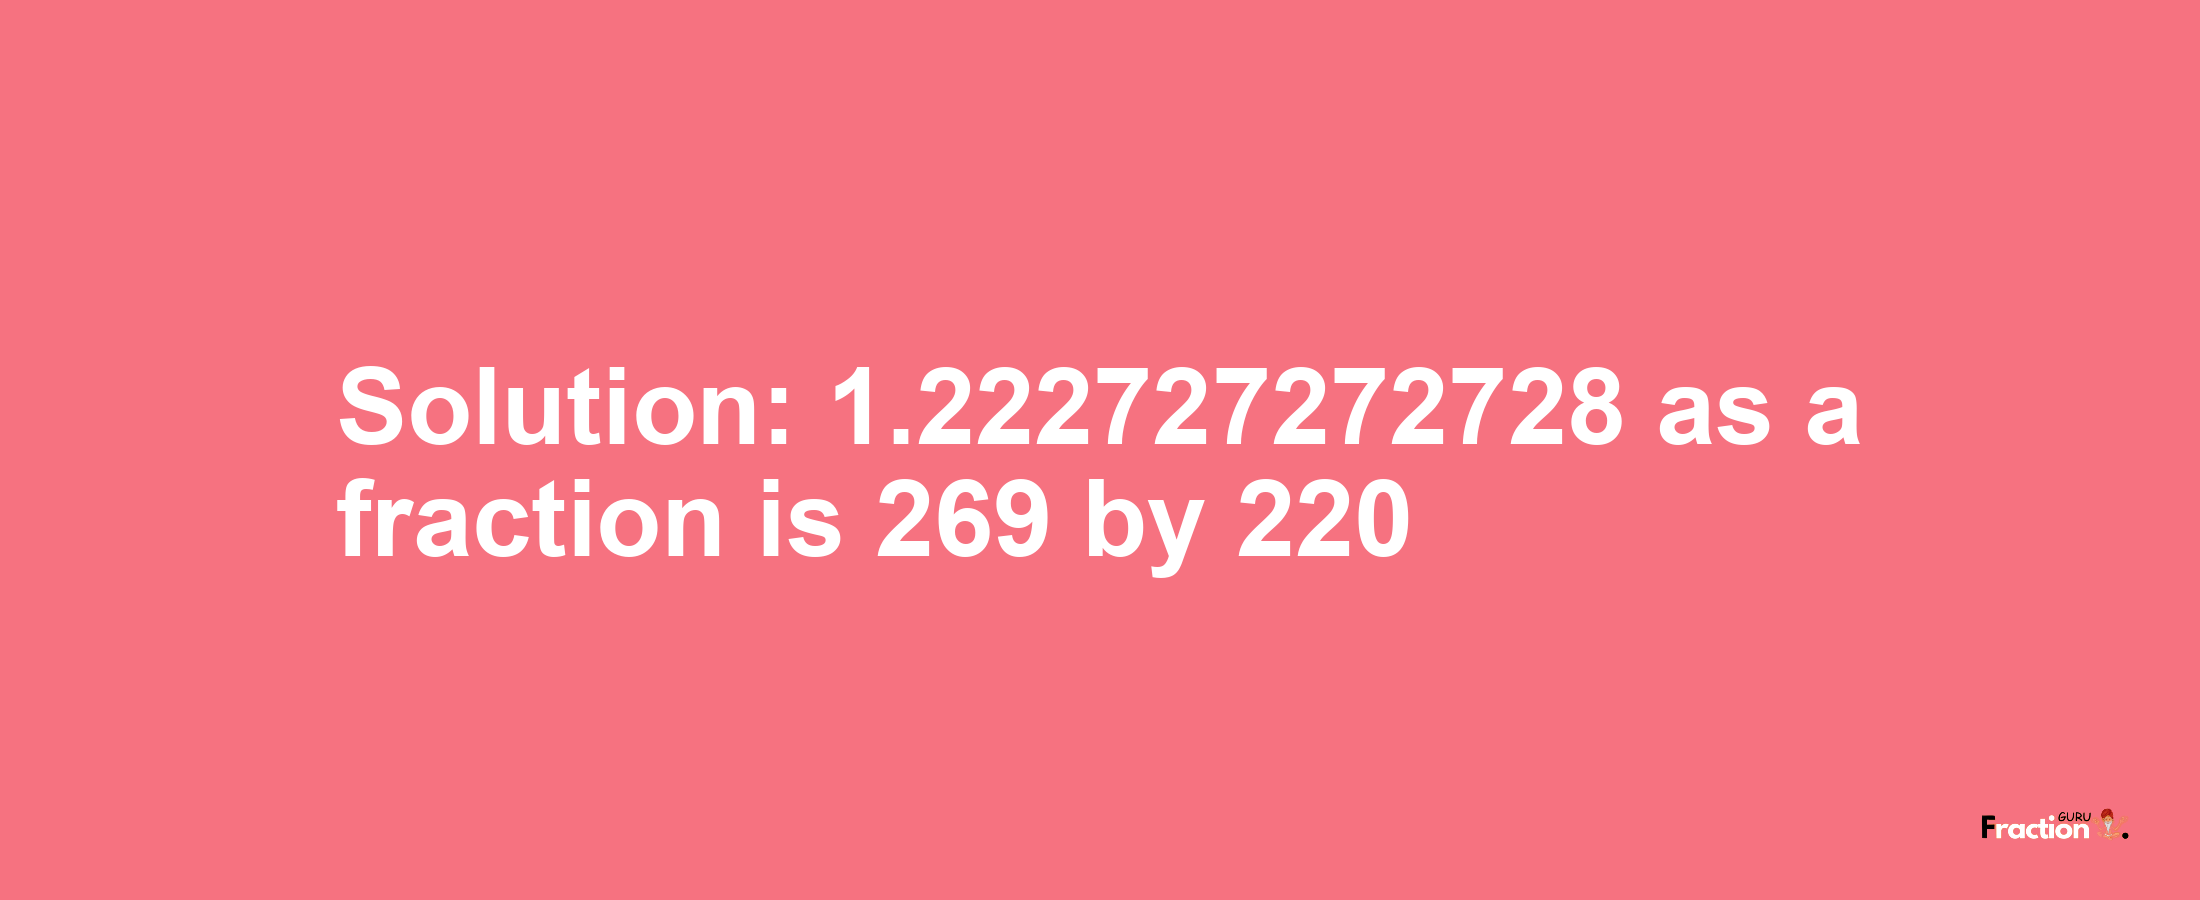 Solution:1.222727272728 as a fraction is 269/220